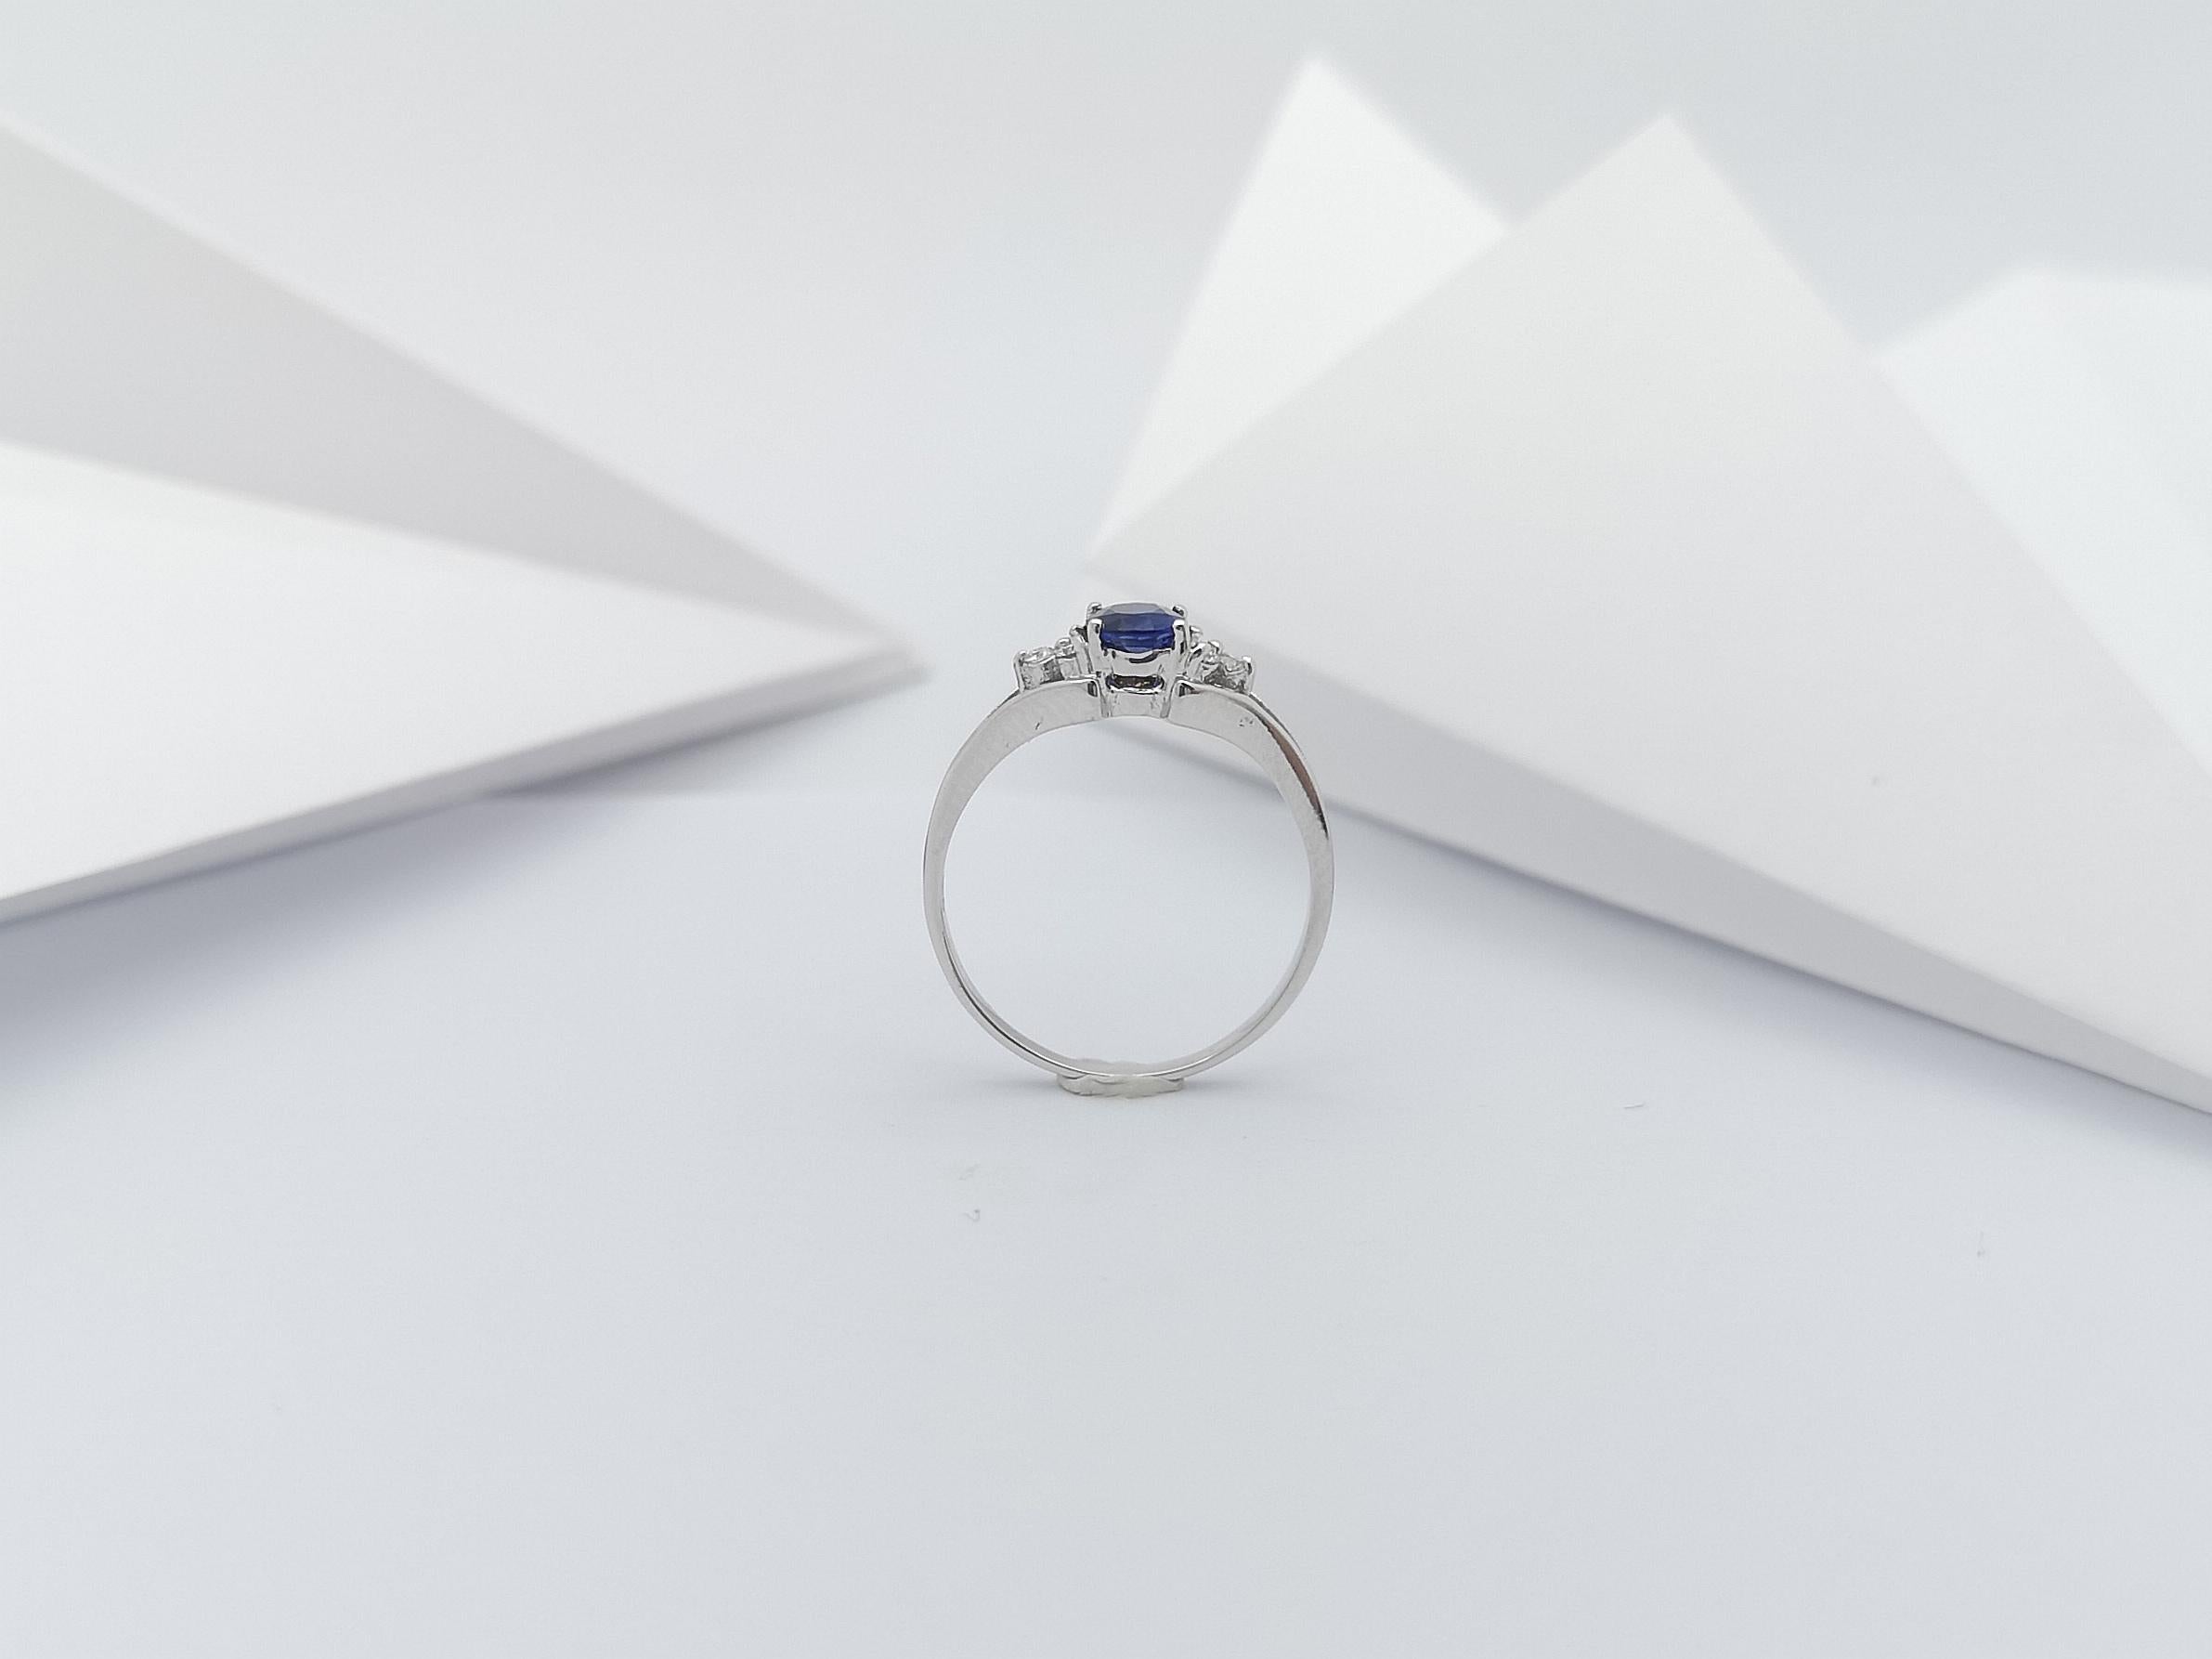 Blue Sapphire with Diamond Ring Set in 18 Karat White Gold Settings For Sale 5